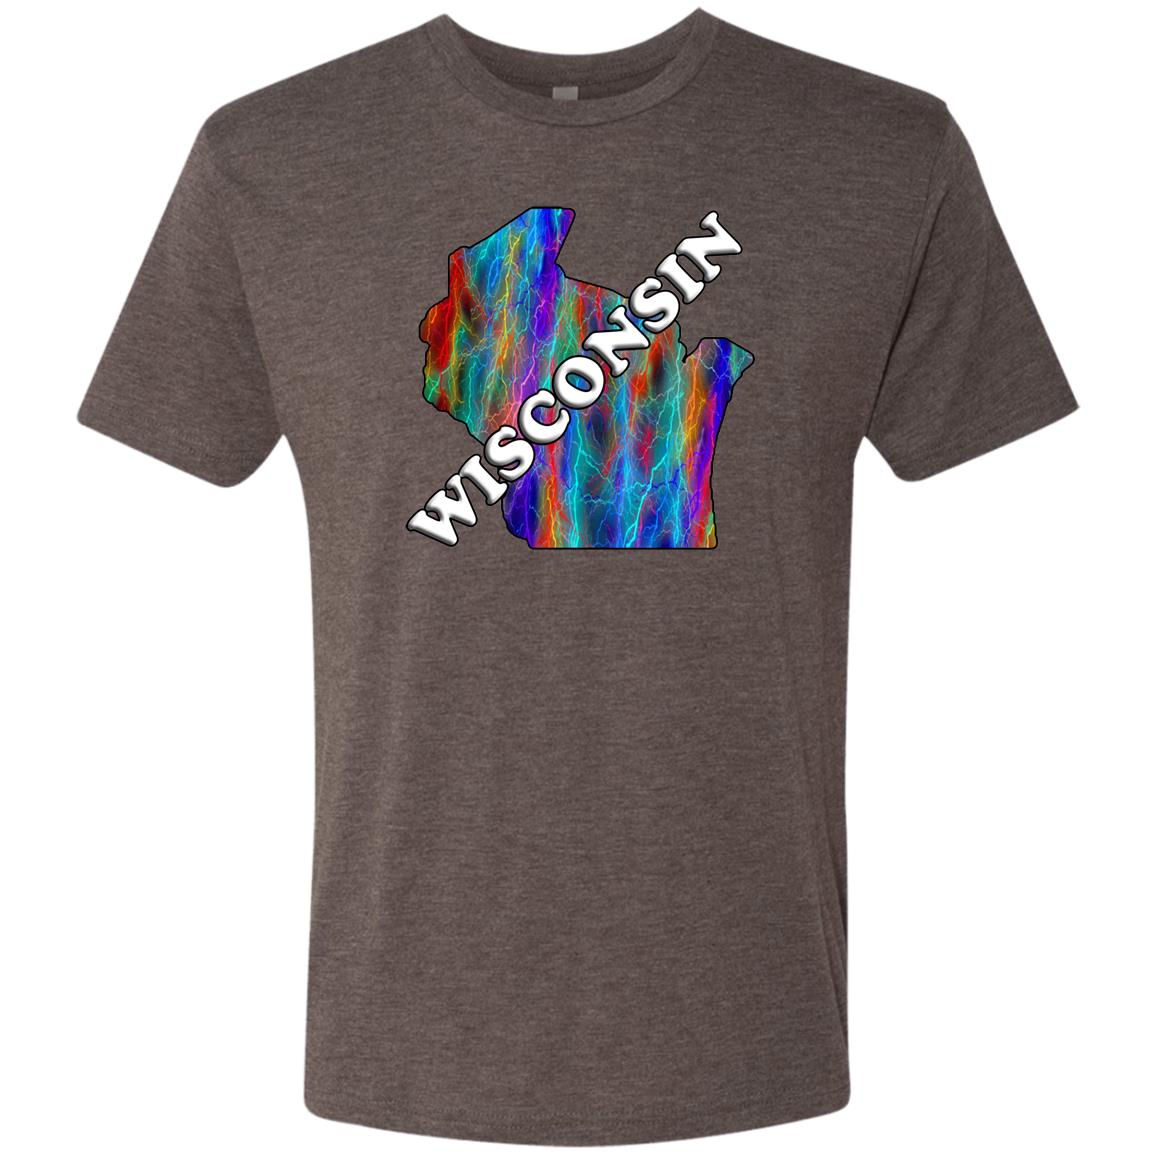 Wisconsin State T-Shirt